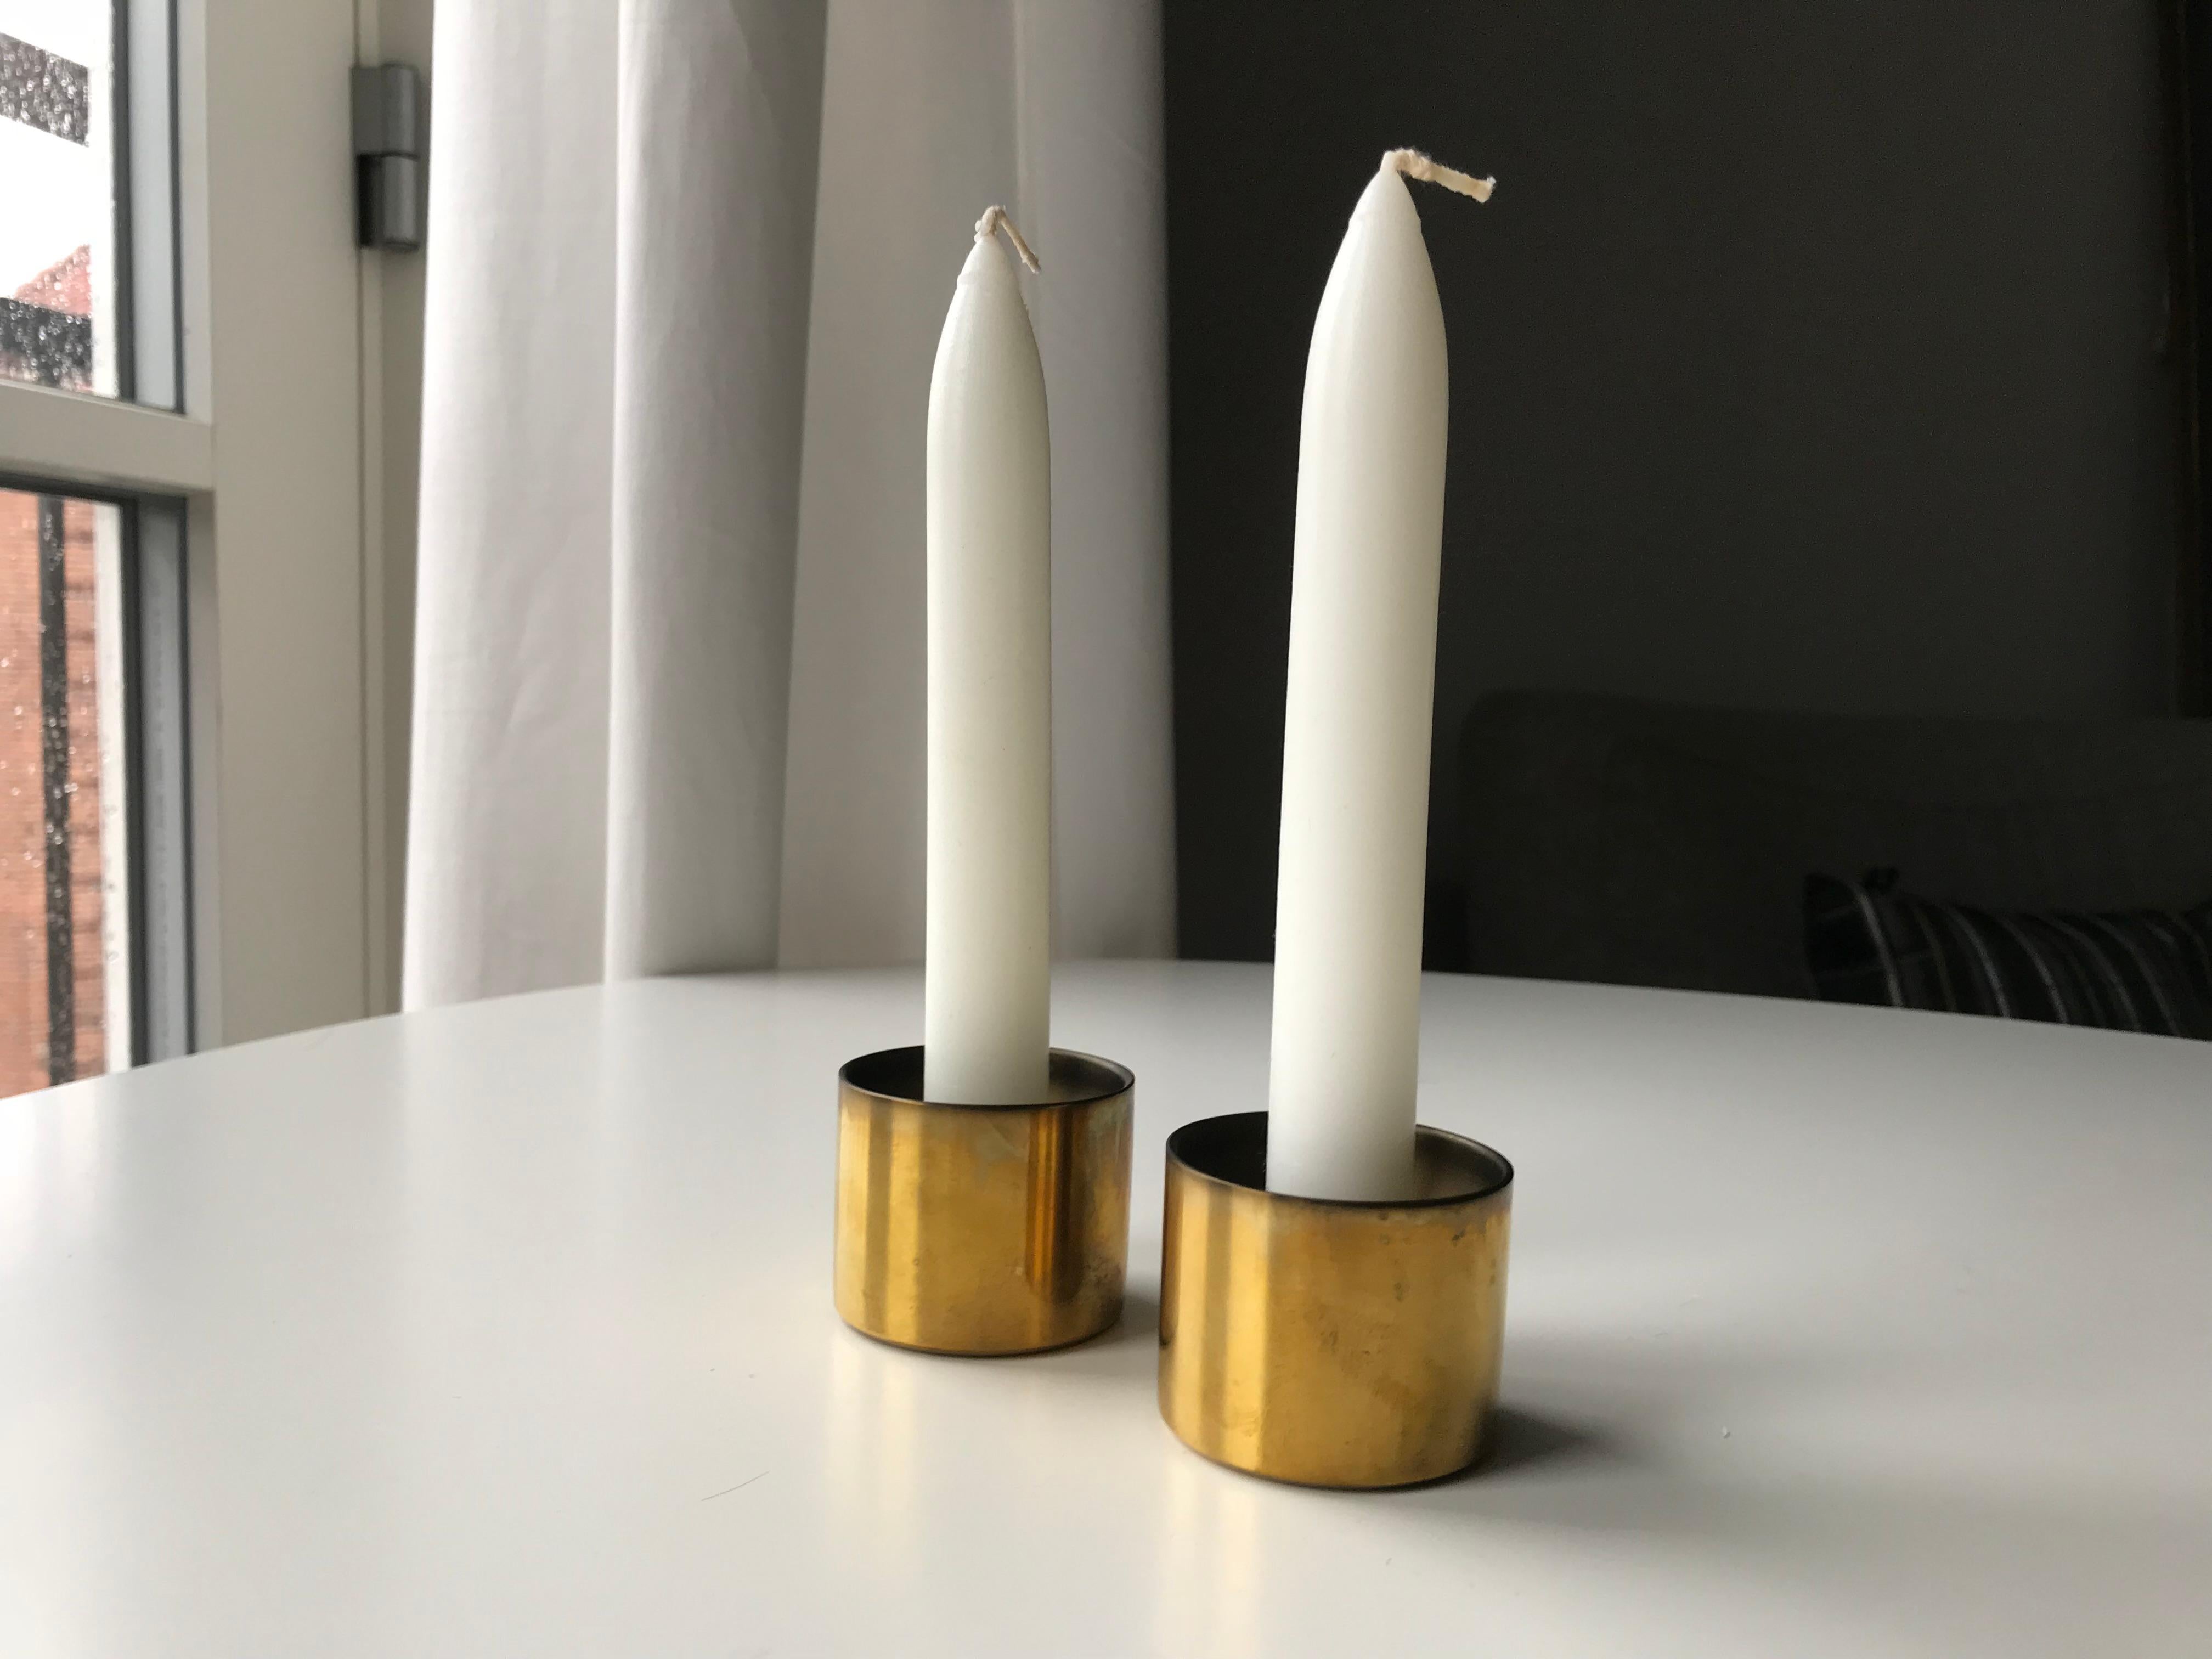 Mid-Century Scandinavian Modern Stelton Original boxed pair of chandeliers in brass. Box including original candlesticks. Discontinued from Stelton of Denmark. The most iconic and well known items from Stelton is designed by Arne Jacobsen. This set